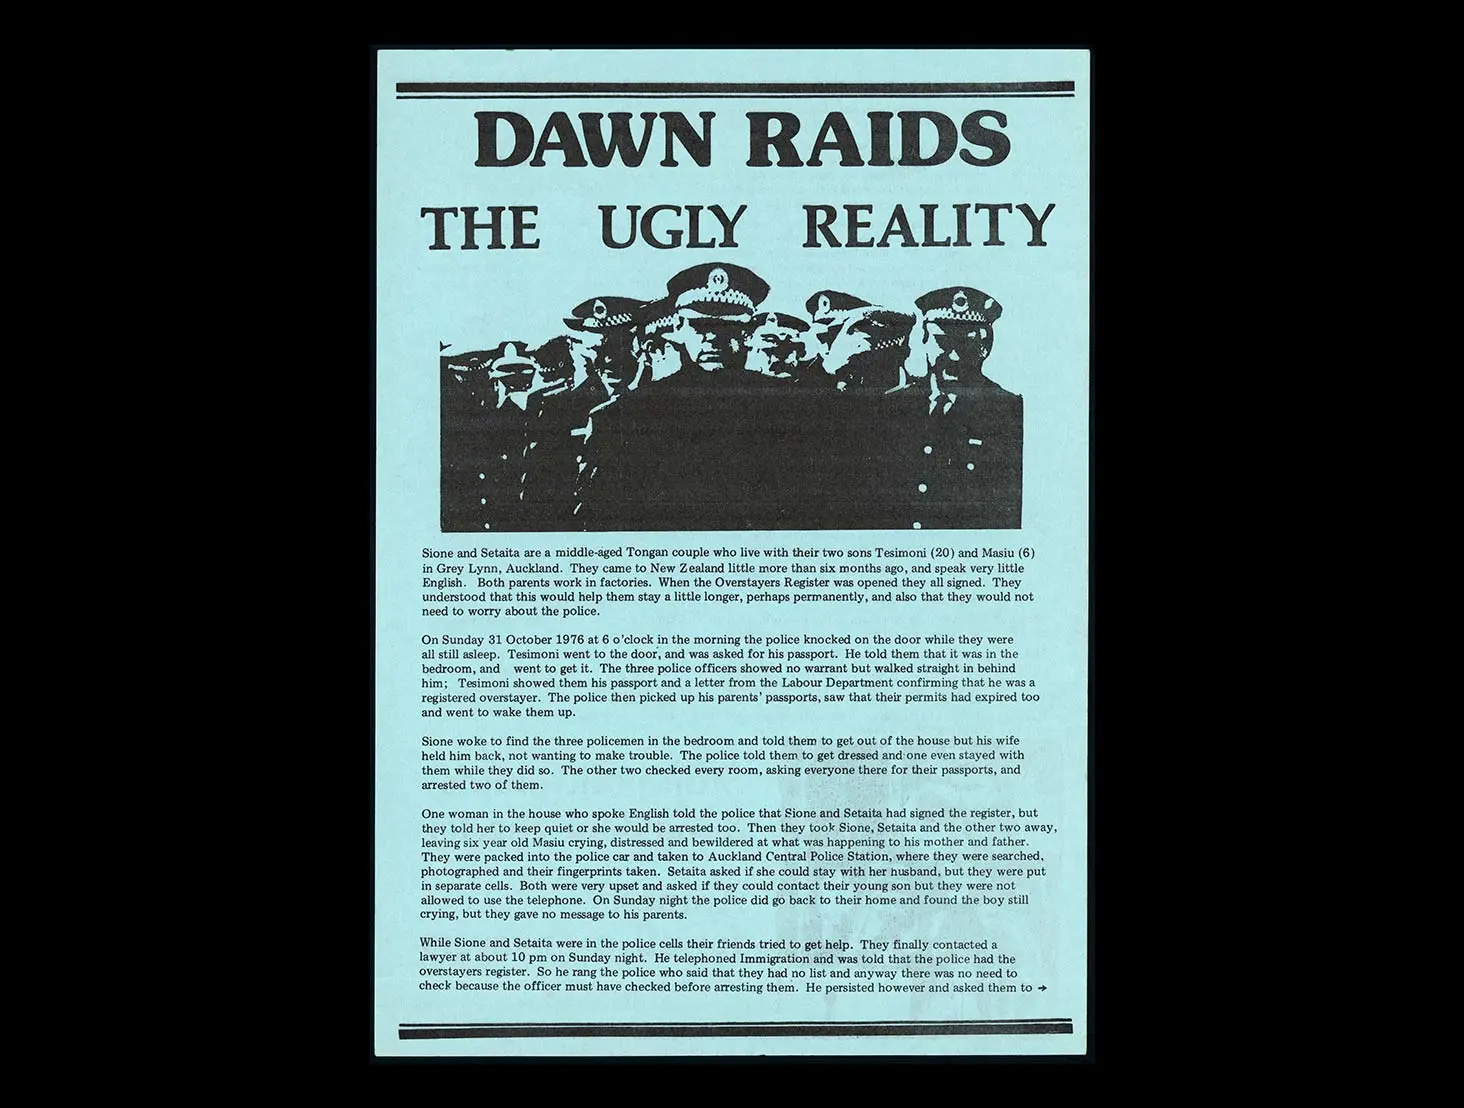 Colour 1976 information sheet titled 'Dawn raids: The ugly reality' with an image of Aotearoa NZ Police printed on blue paper.